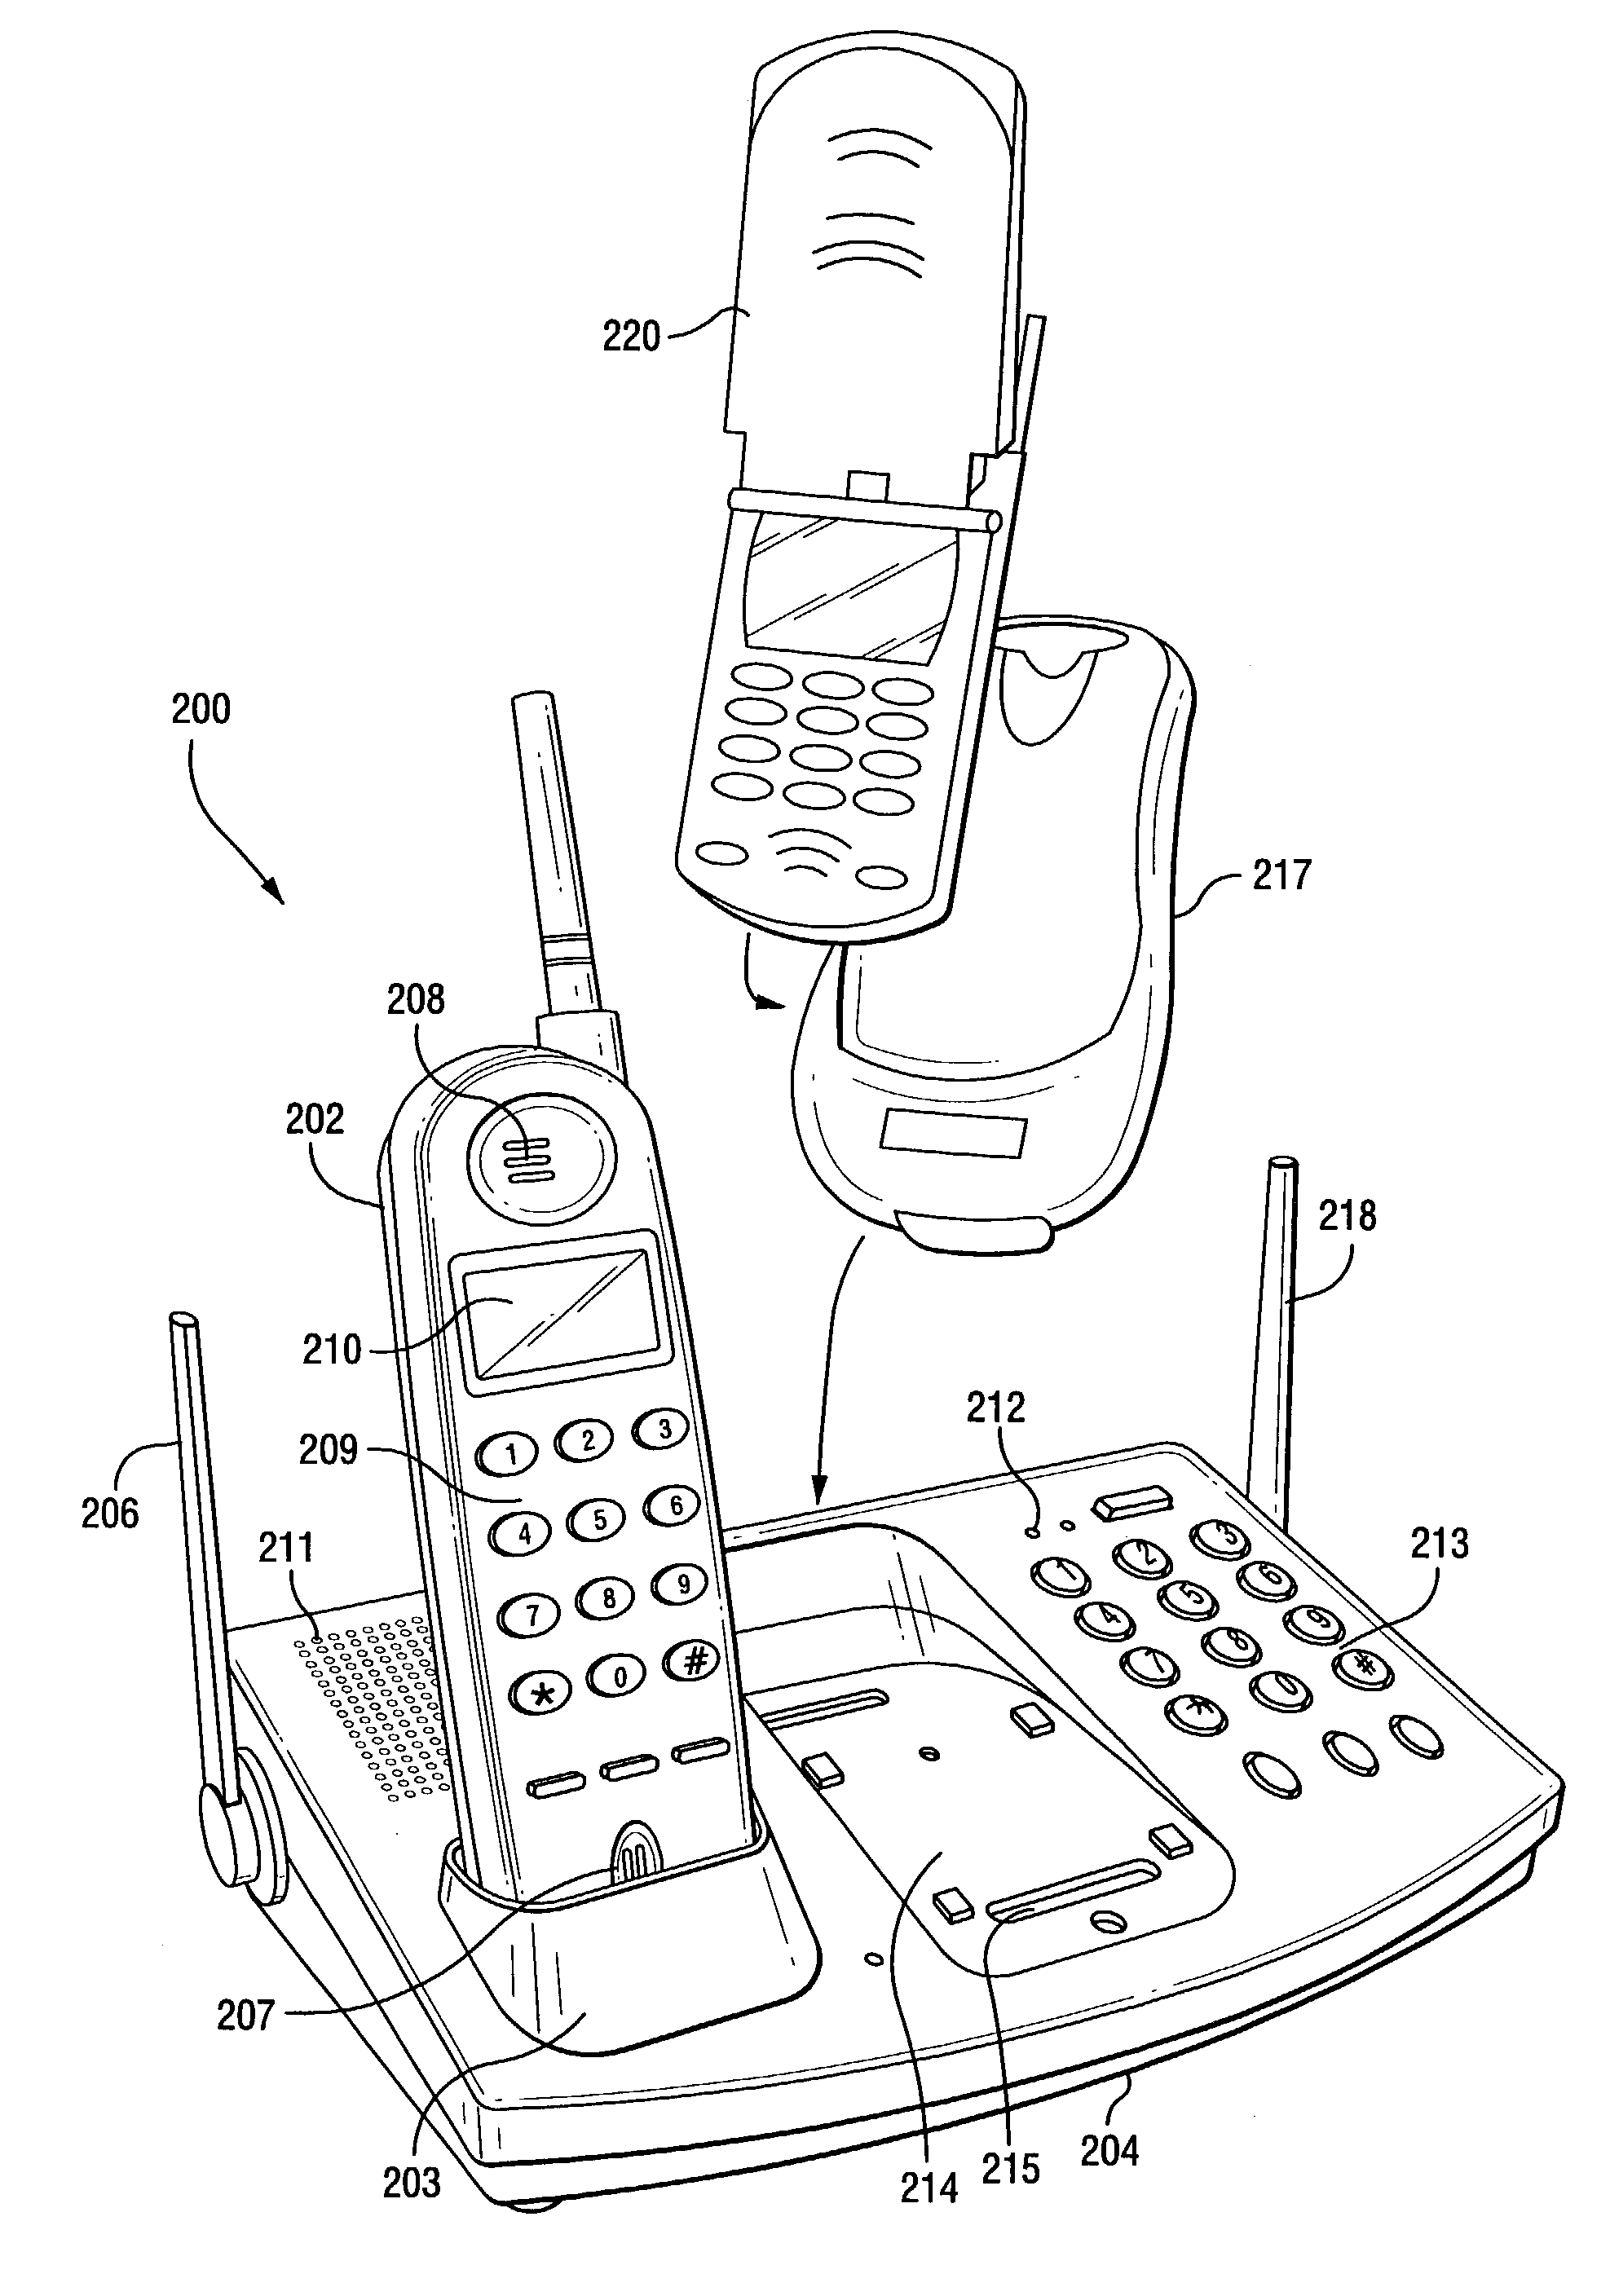 Communication system for landline and wireless calls